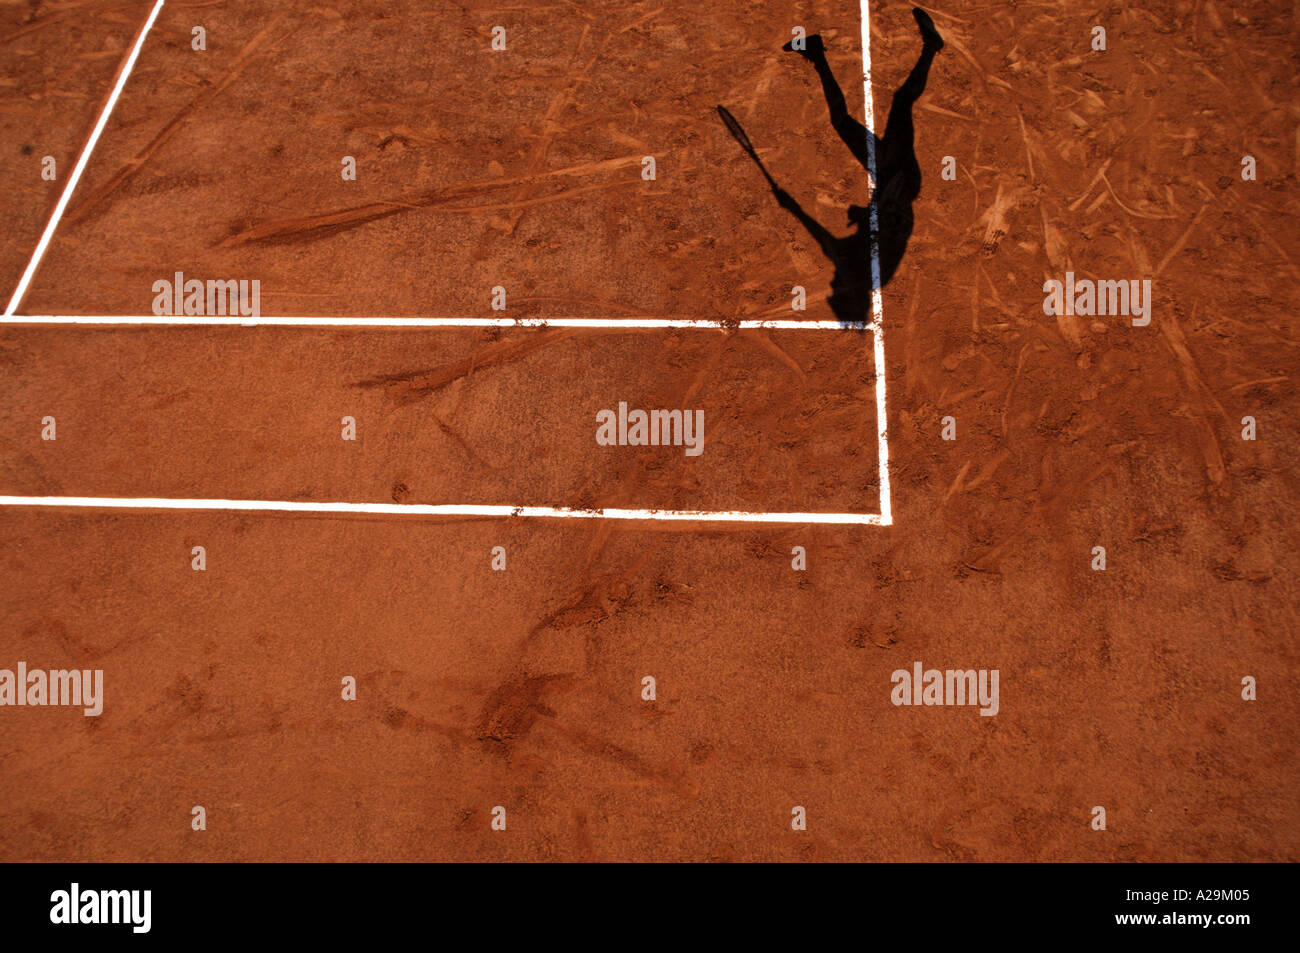 The shadow of a tennis player serving during a game on a clay court Stock Photo